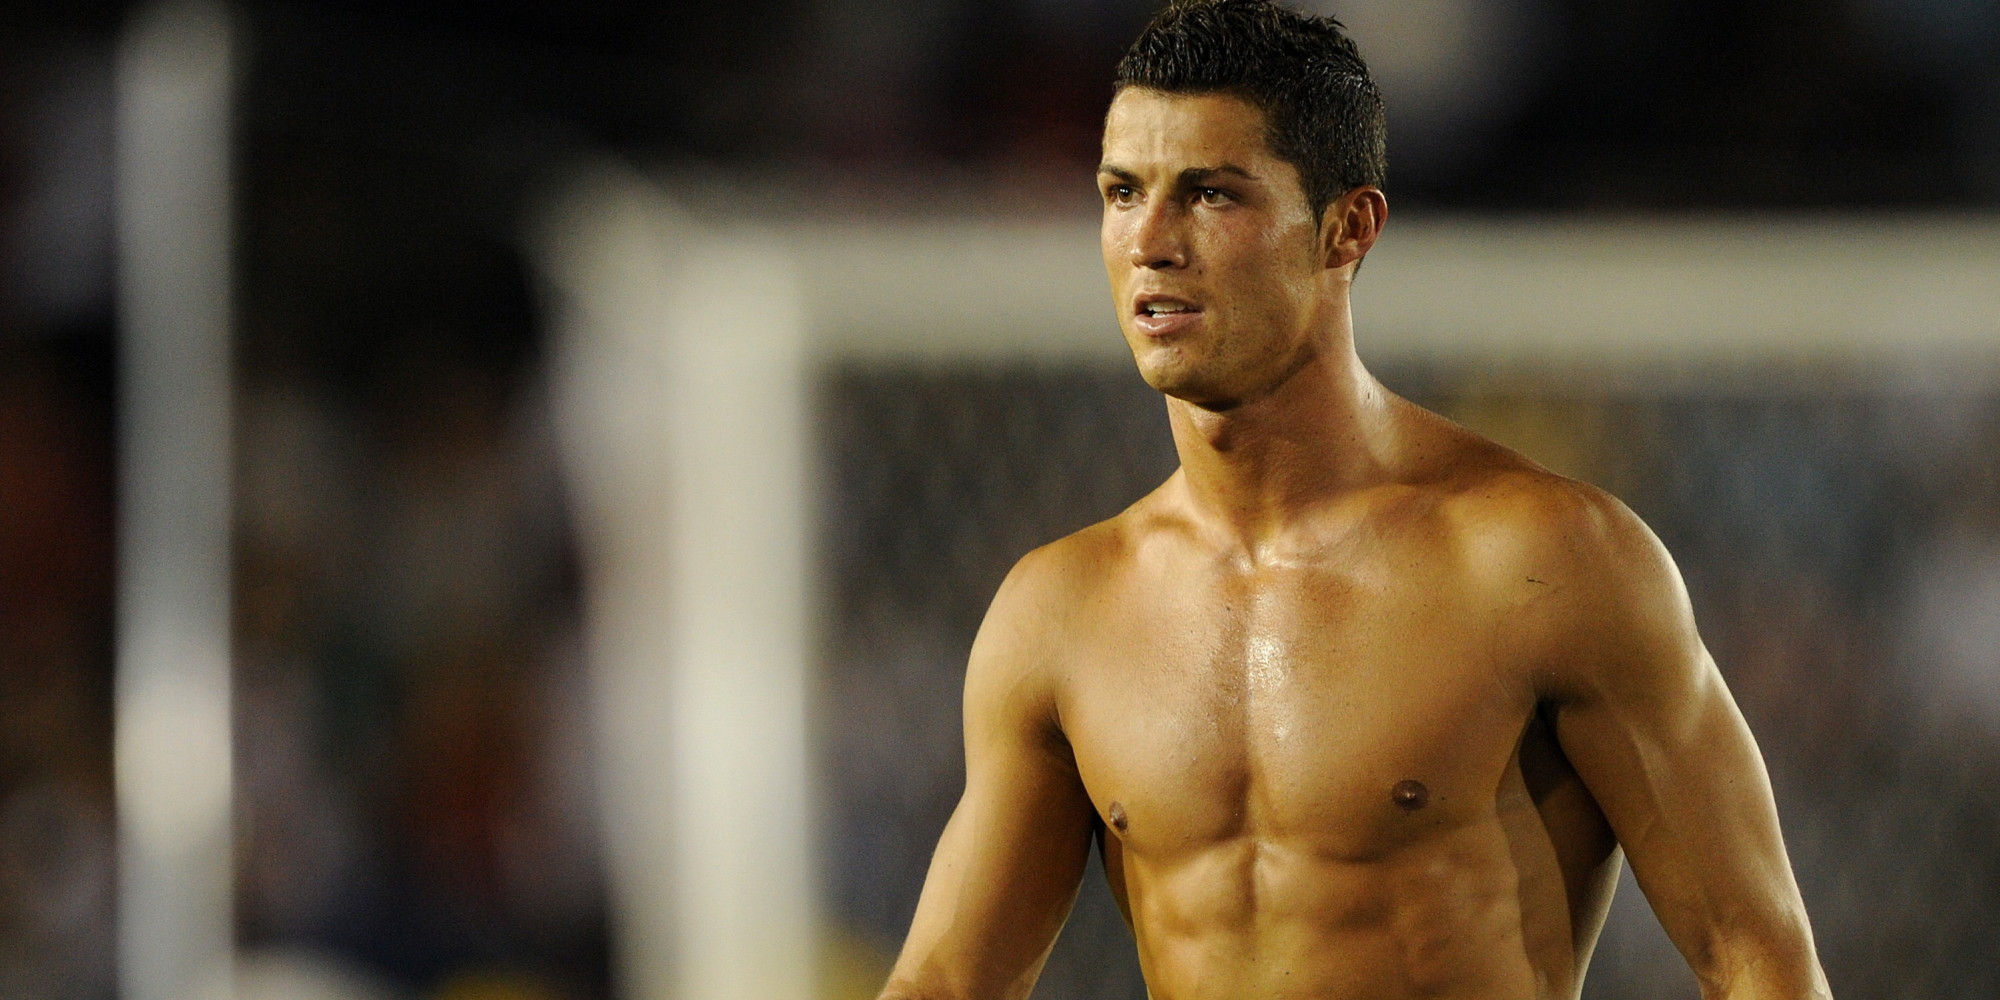 Real Madrid superstar Cristiano Ronaldo strips off for 